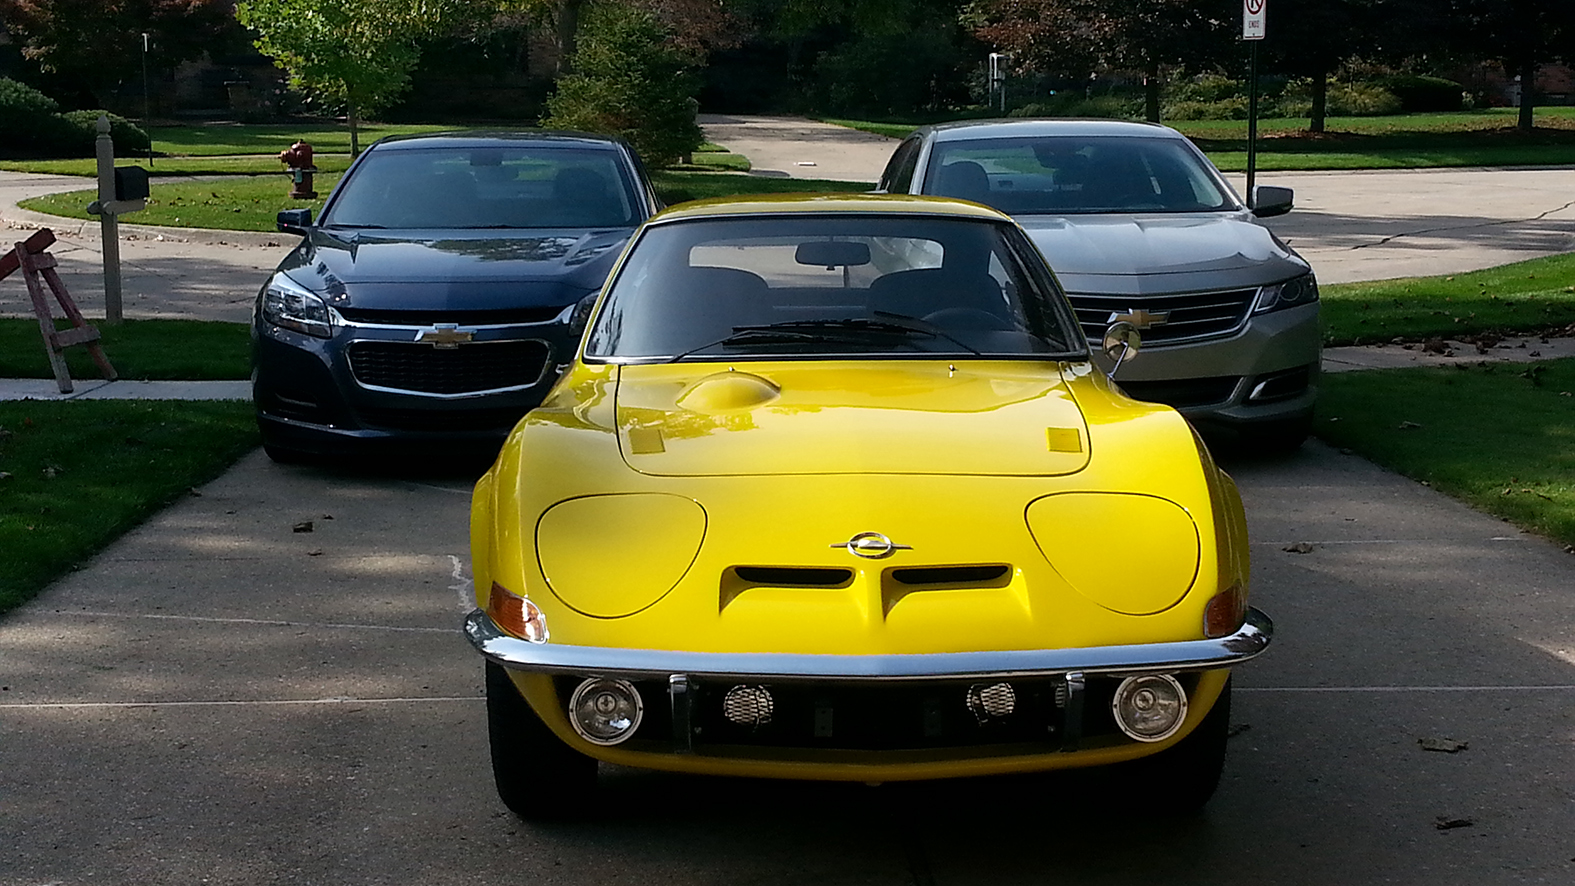 Drive-in: The Opel GT in its full splendor, with a pair of Chevys looking on.